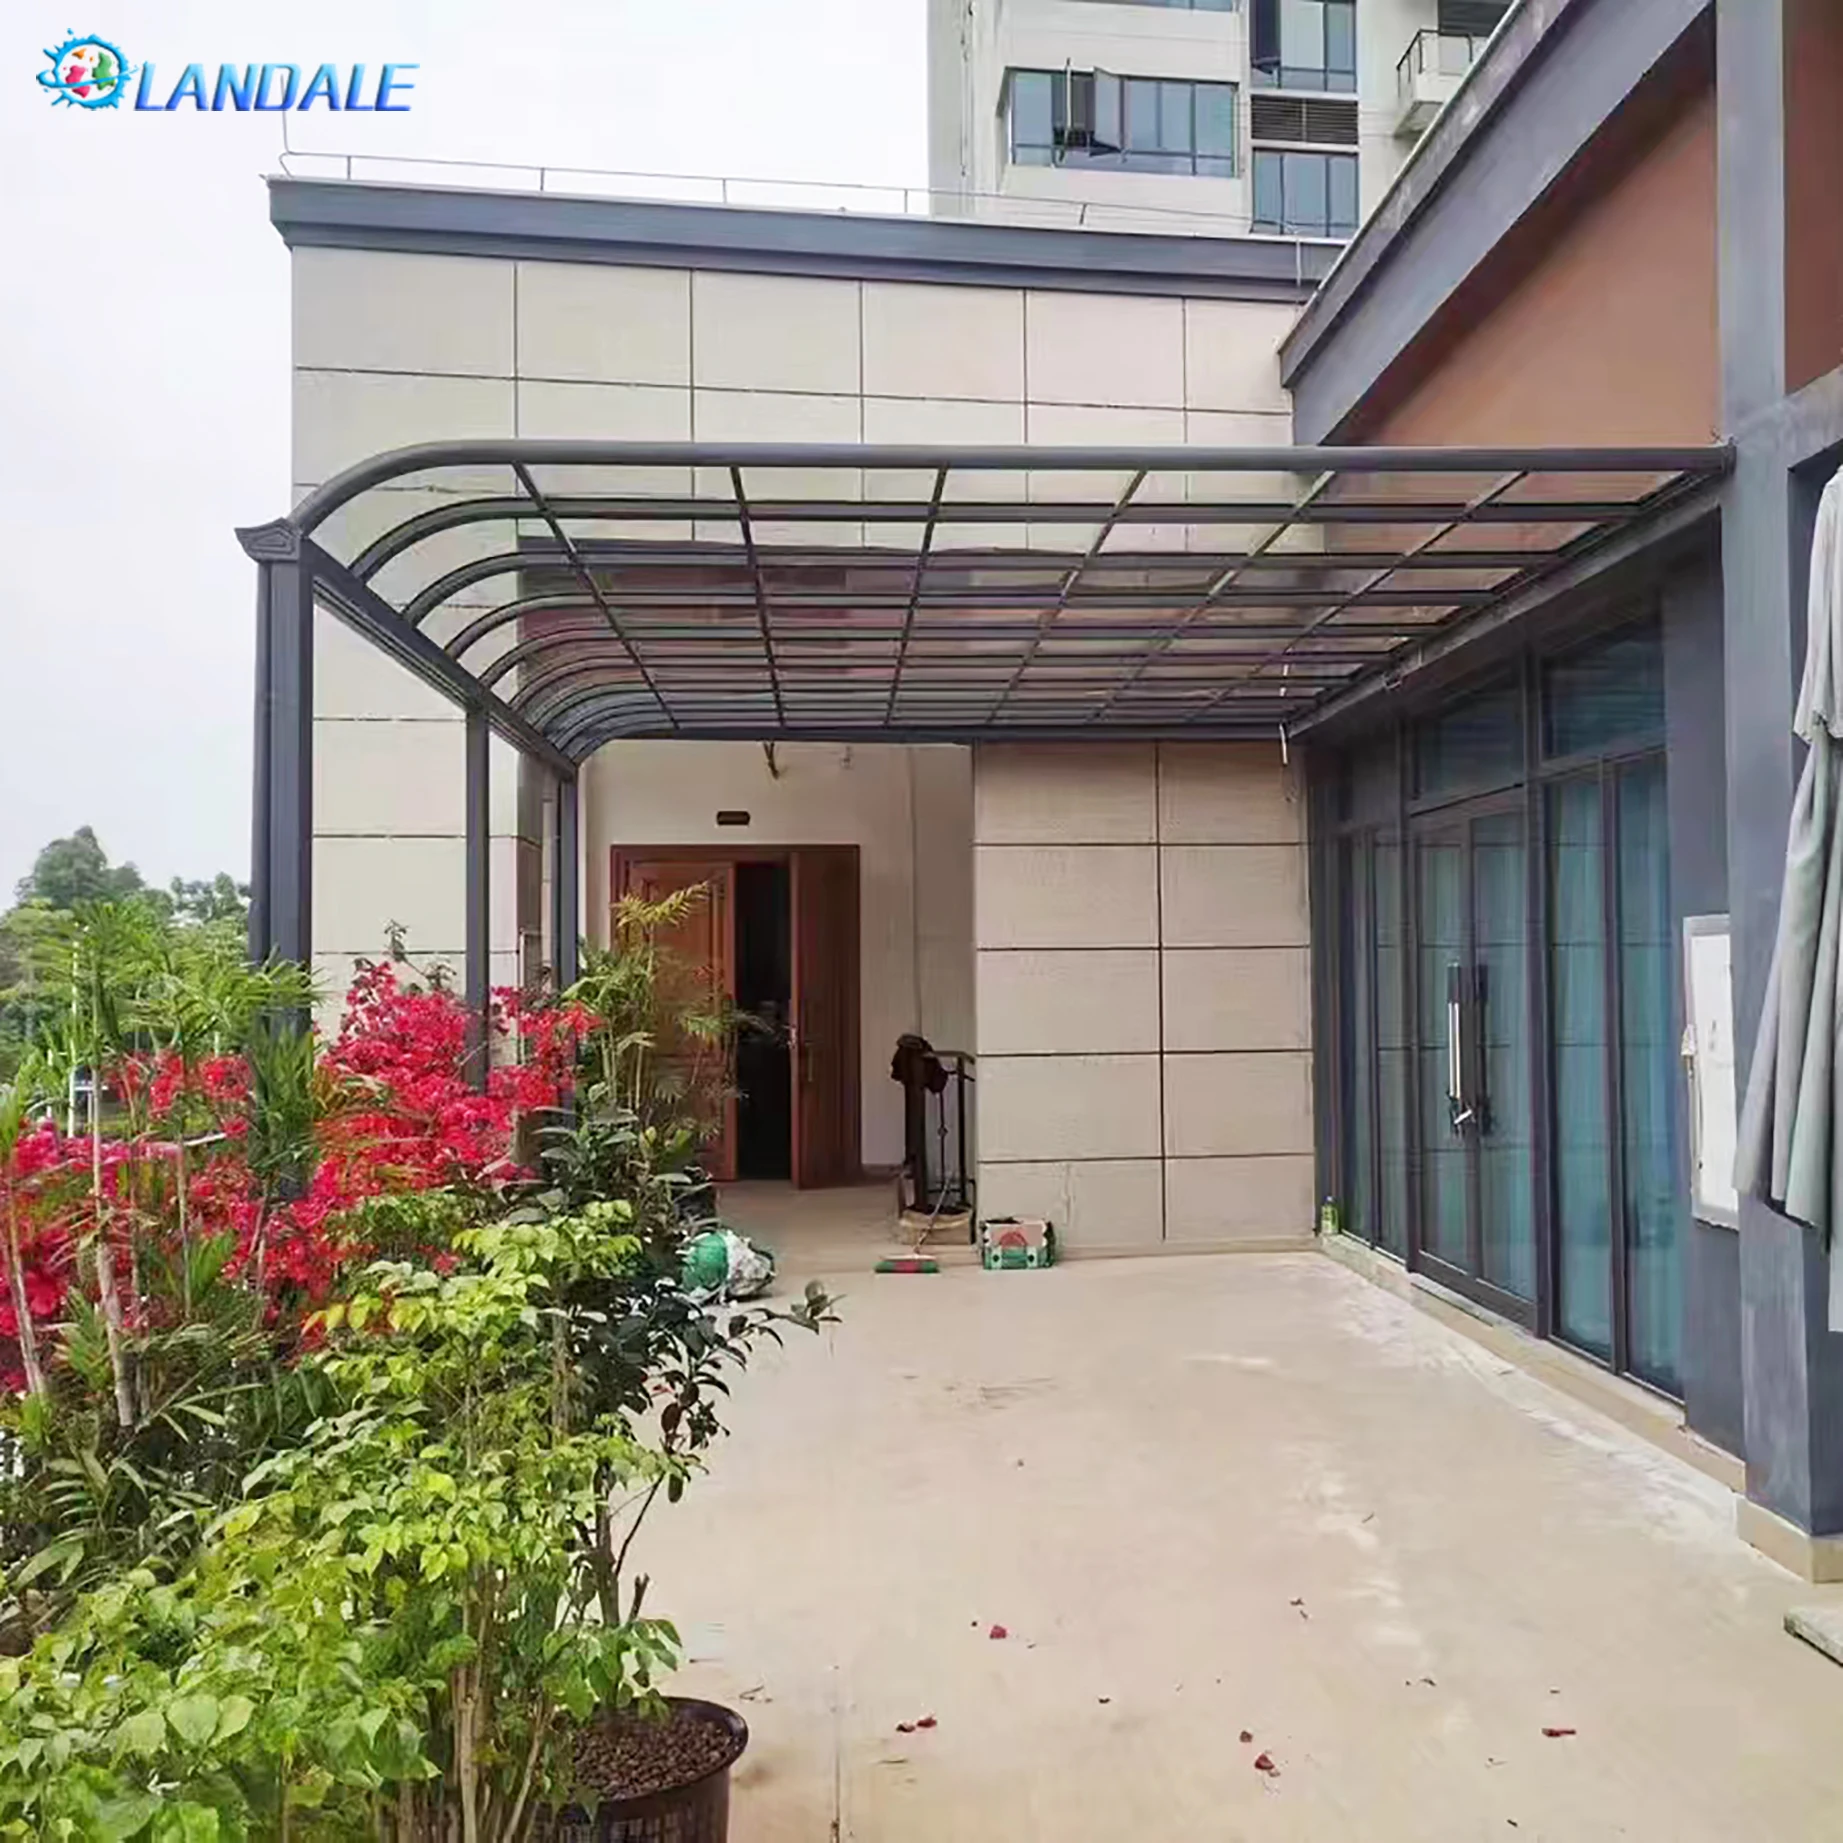 Aluminum alloy frame Outdoor Canopy Polycarbonate Roof Awning Patio Covering for Window